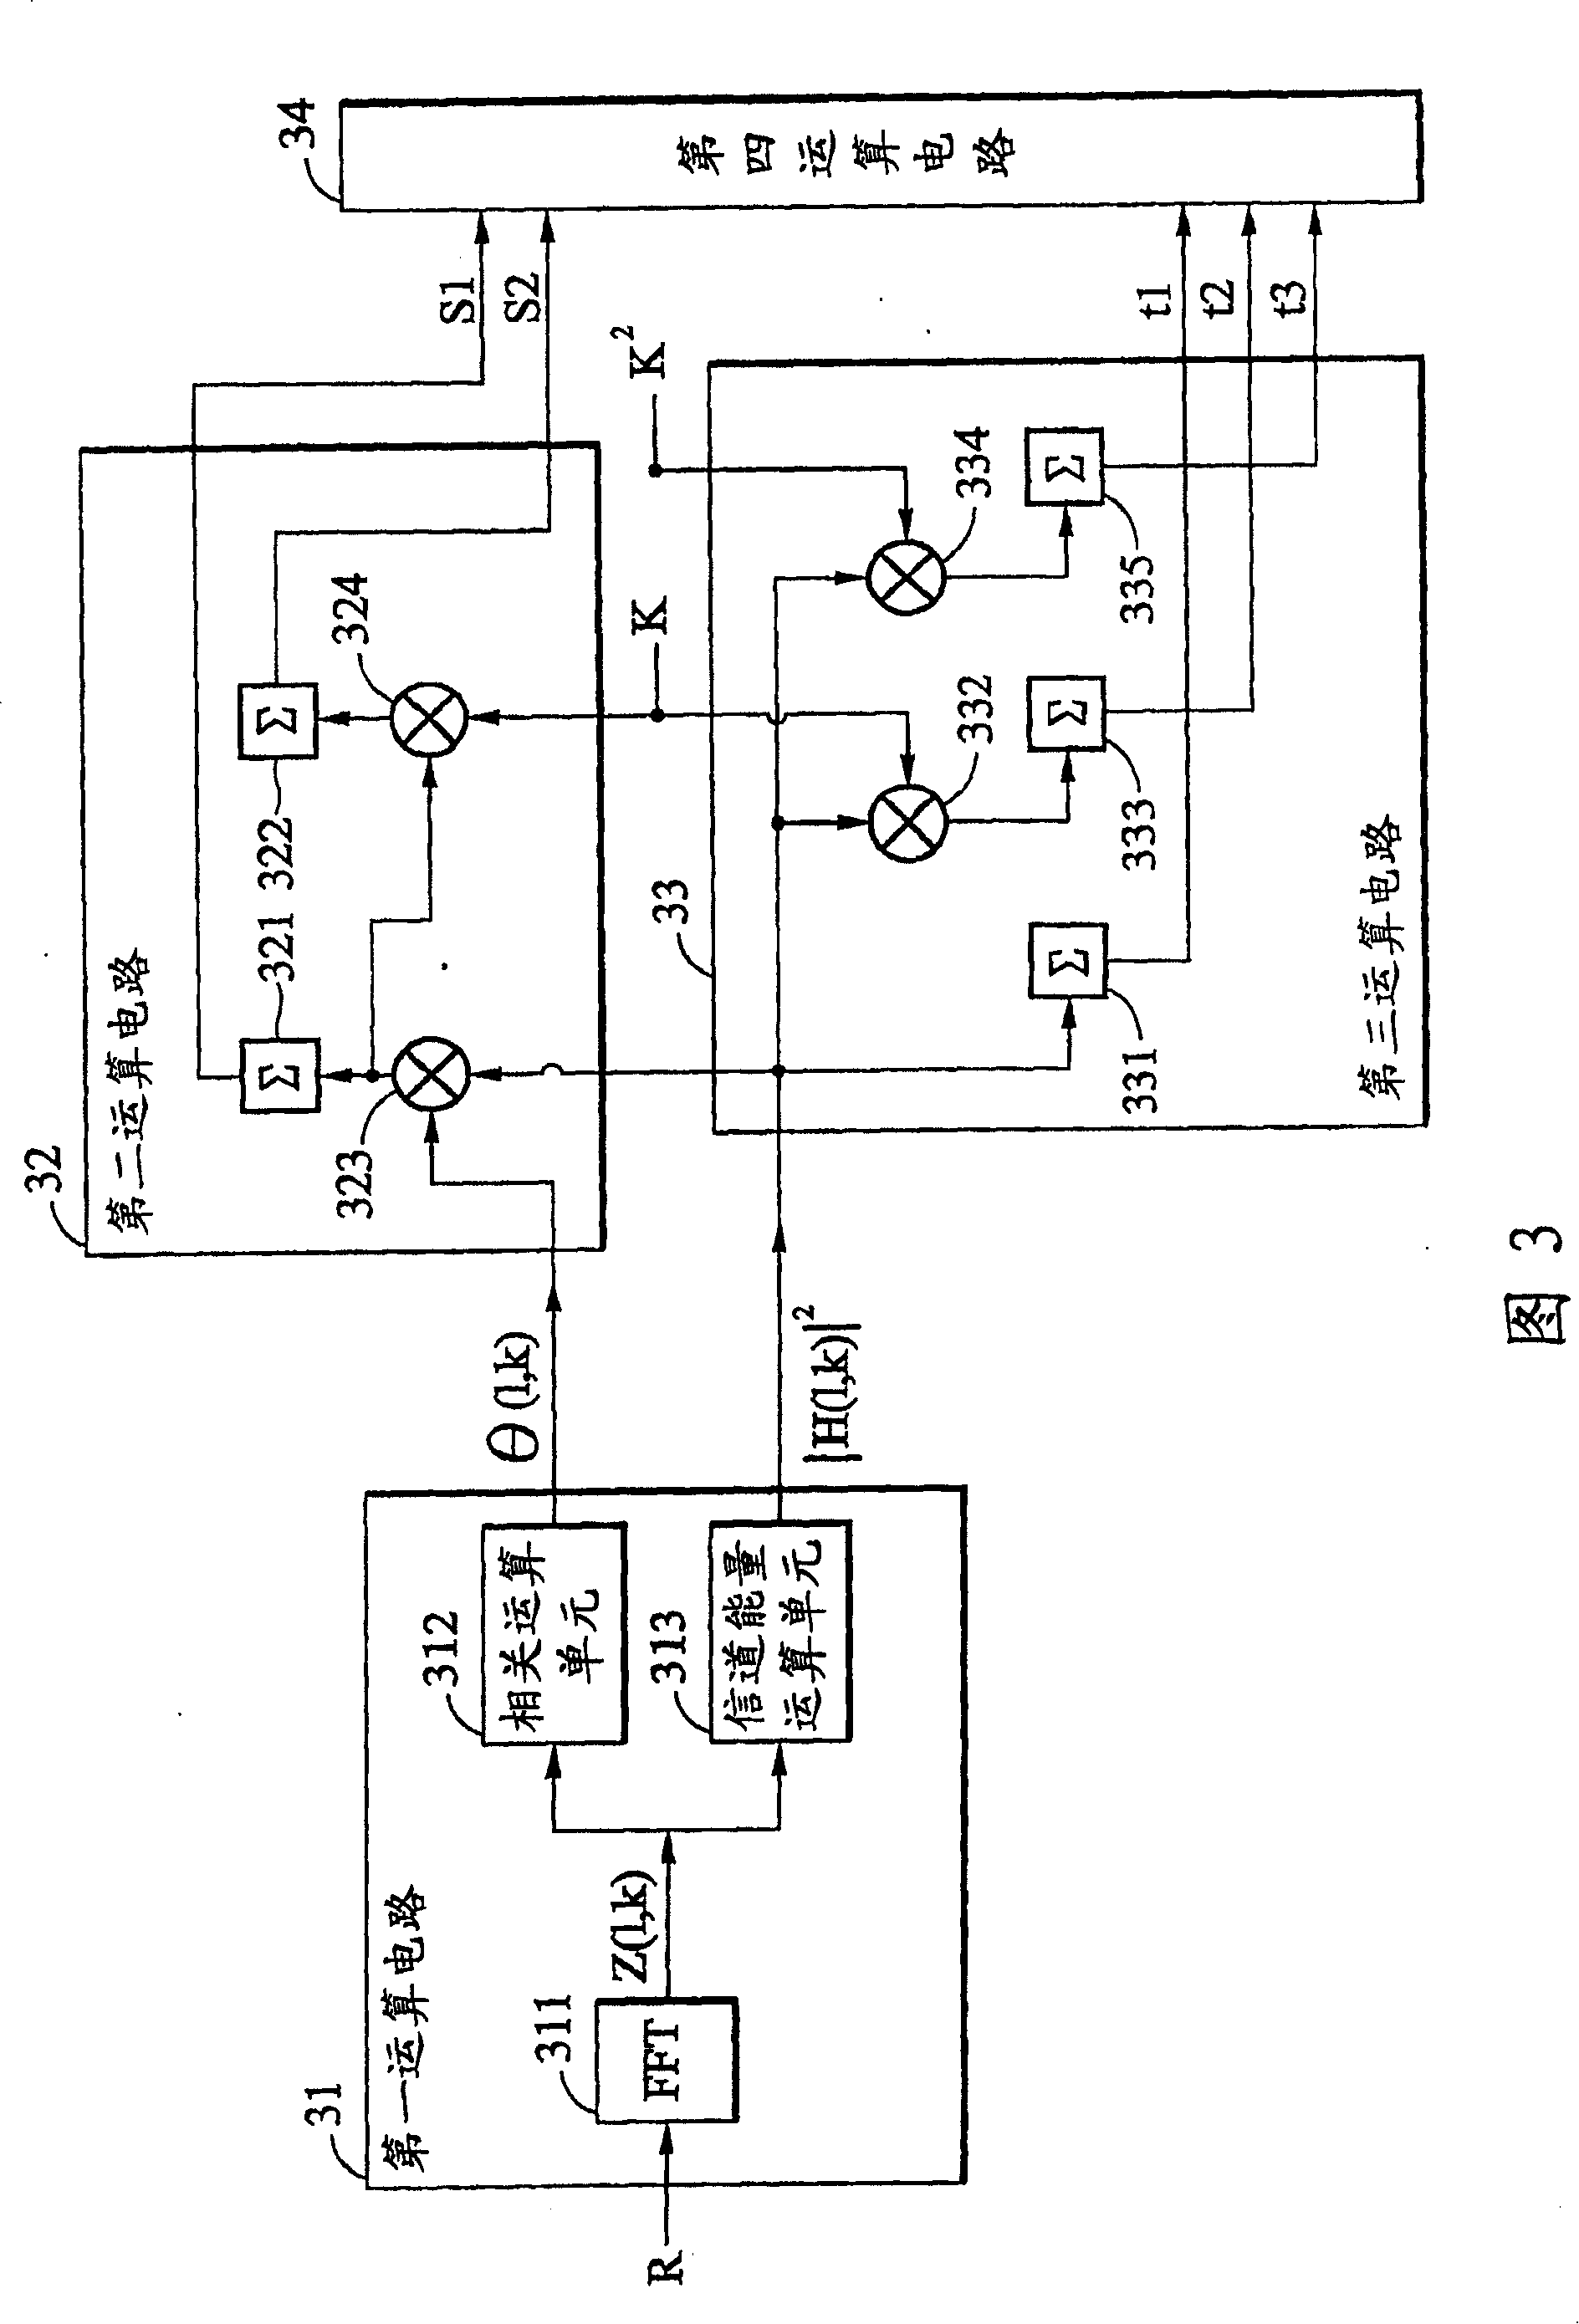 A method and circuit for detecting carrier frequency deviation and sampling frequency deviation